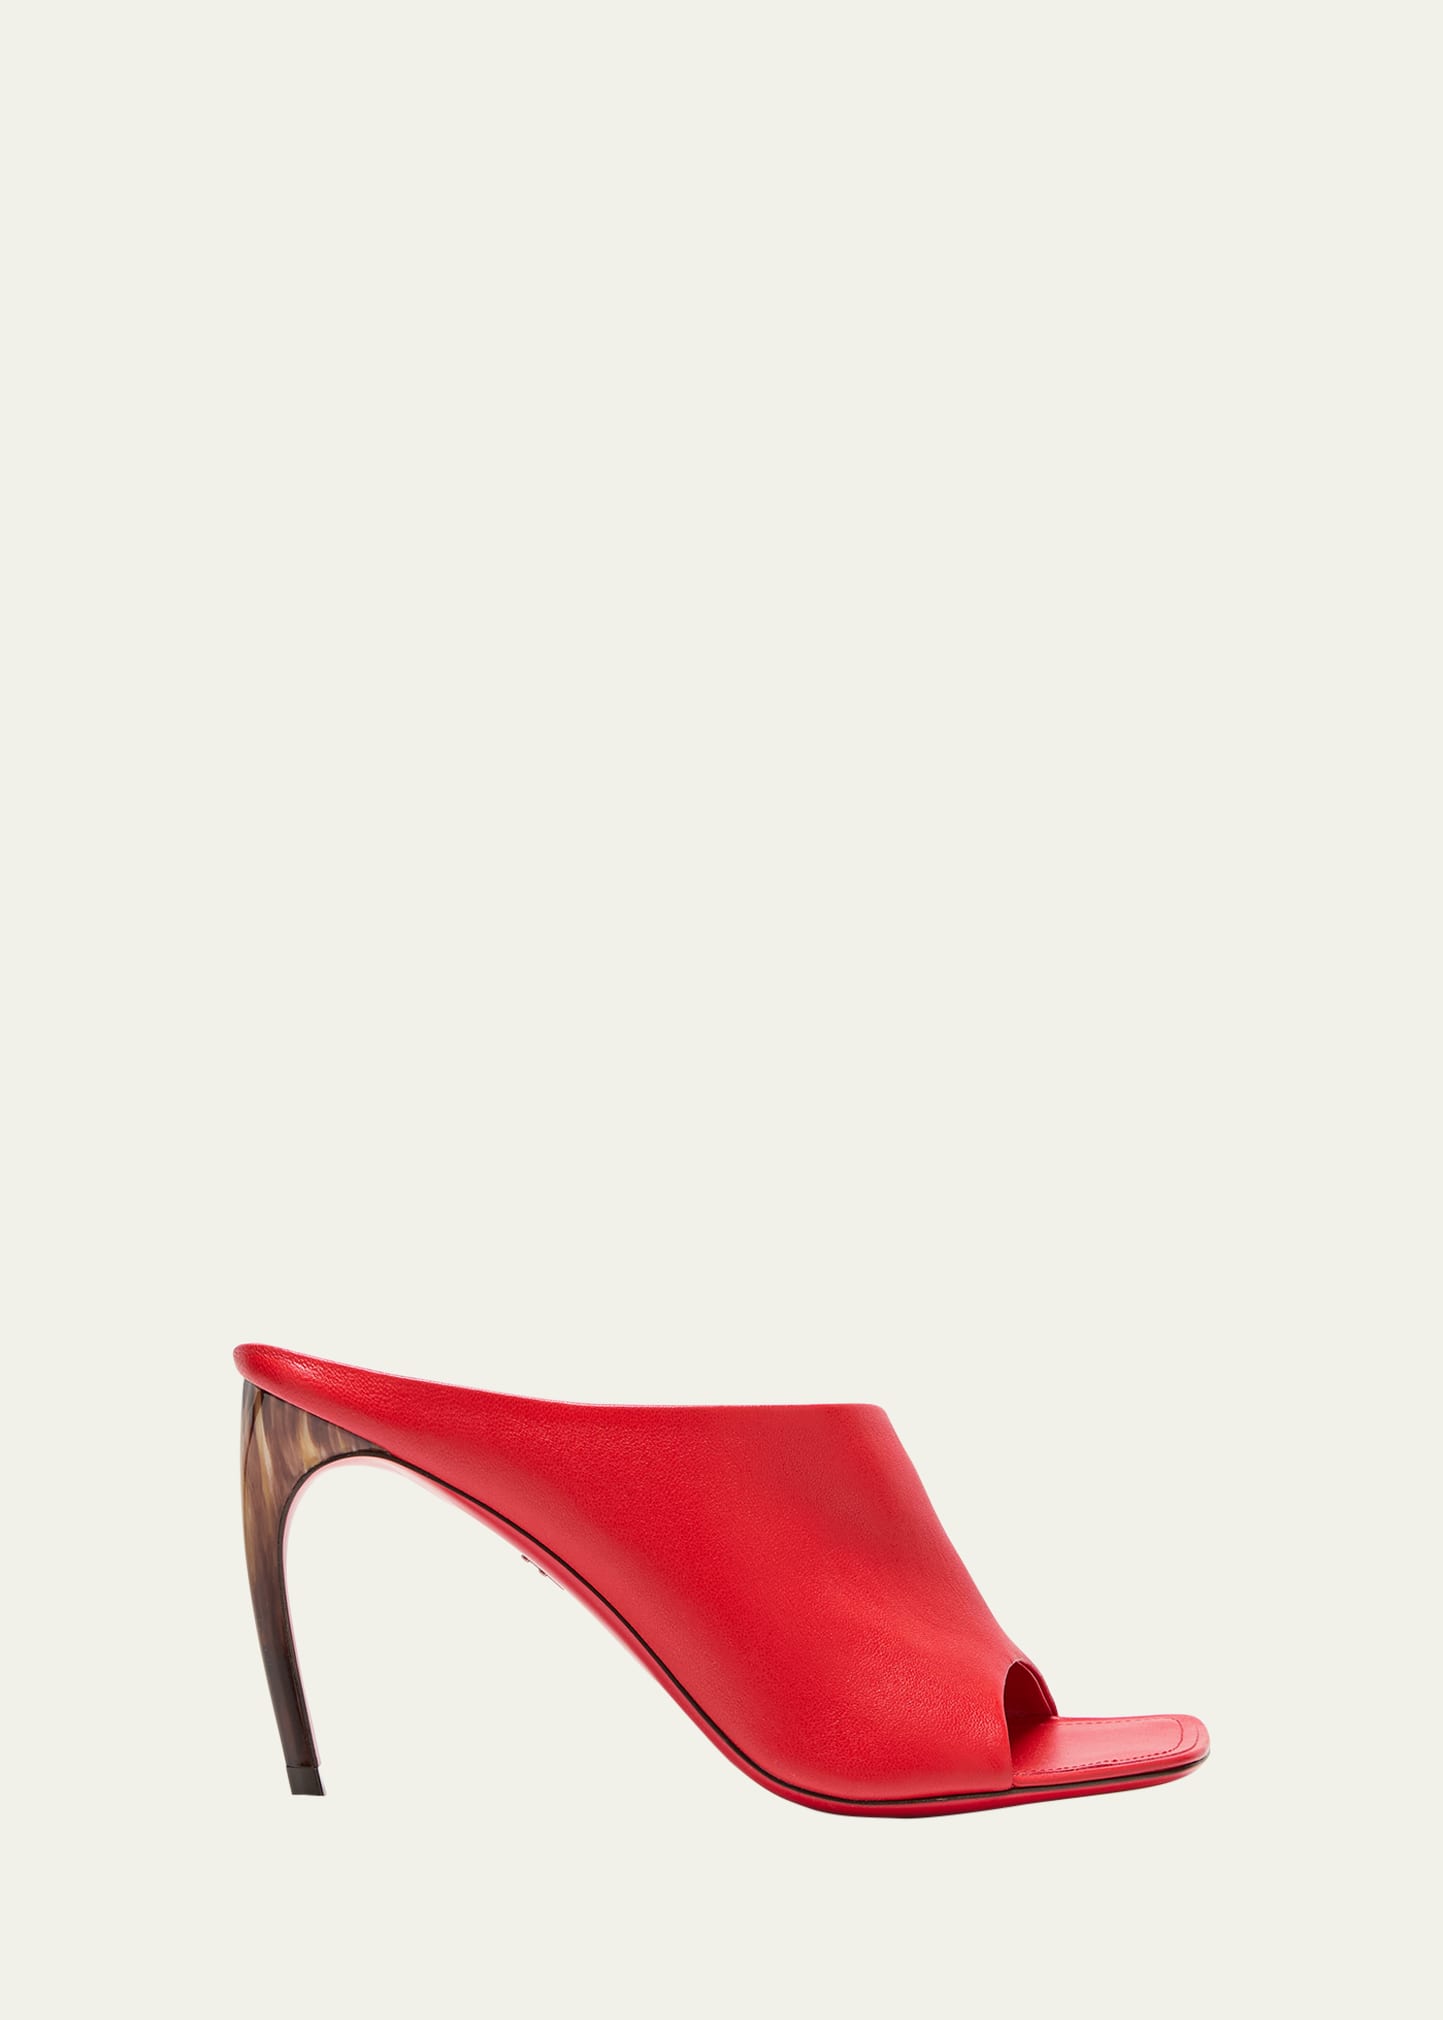 Shop Ferragamo Nymphe Asymmetrical Leather Mule Sandals In Flame Red